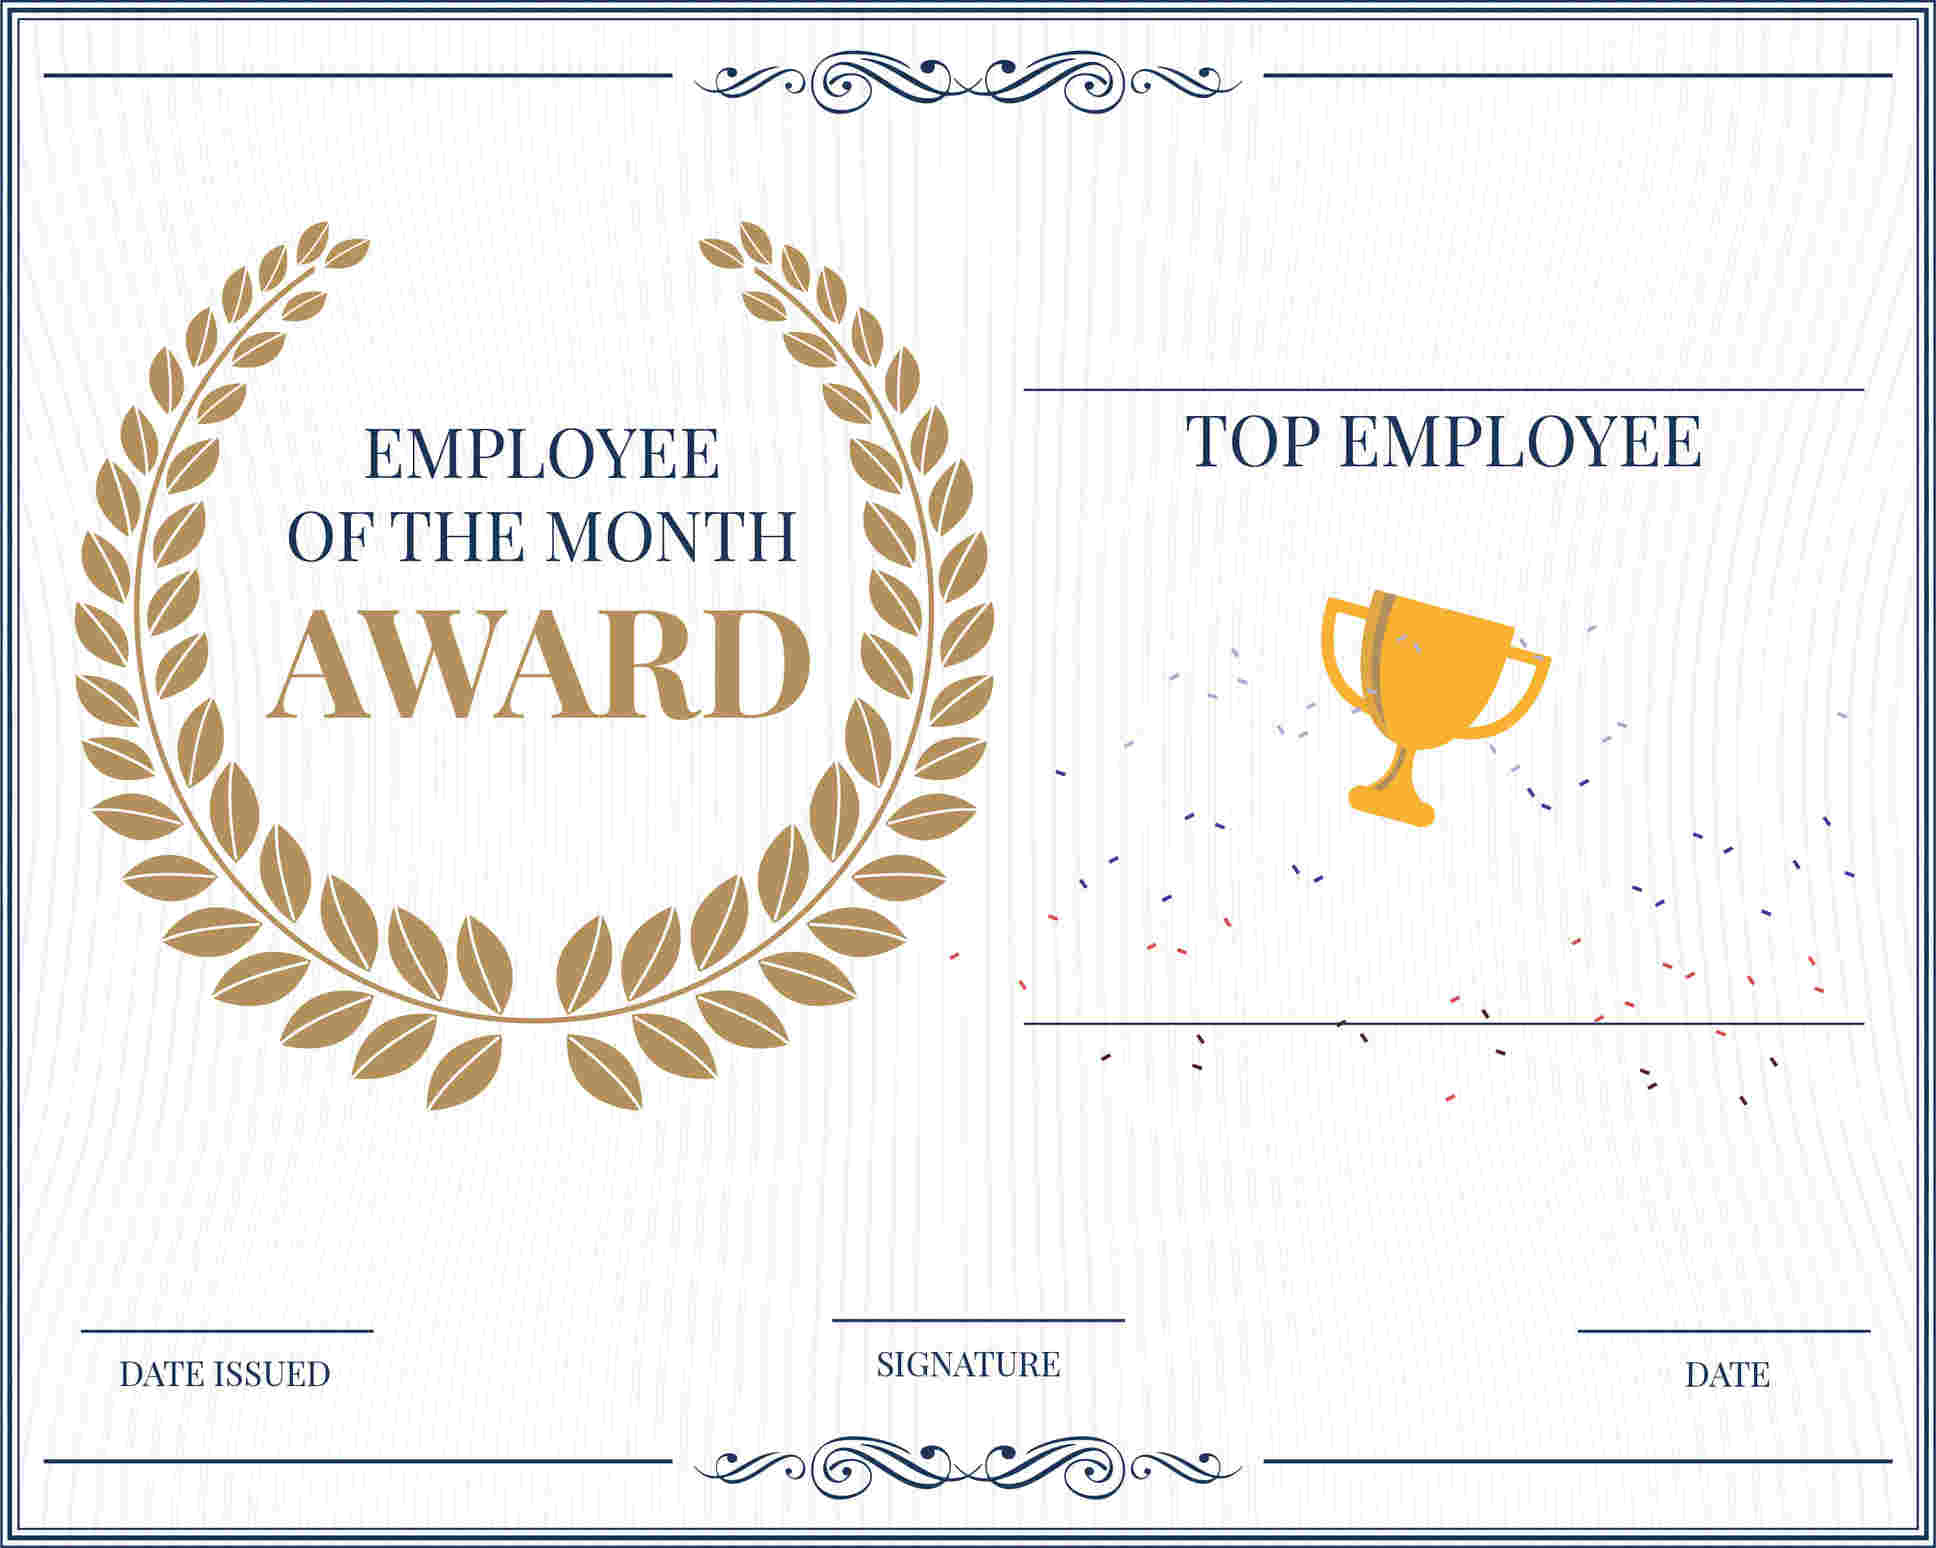 10 Amazing Award Certificate Templates in 10 - Recognize Throughout Employee Of The Year Certificate Template Free